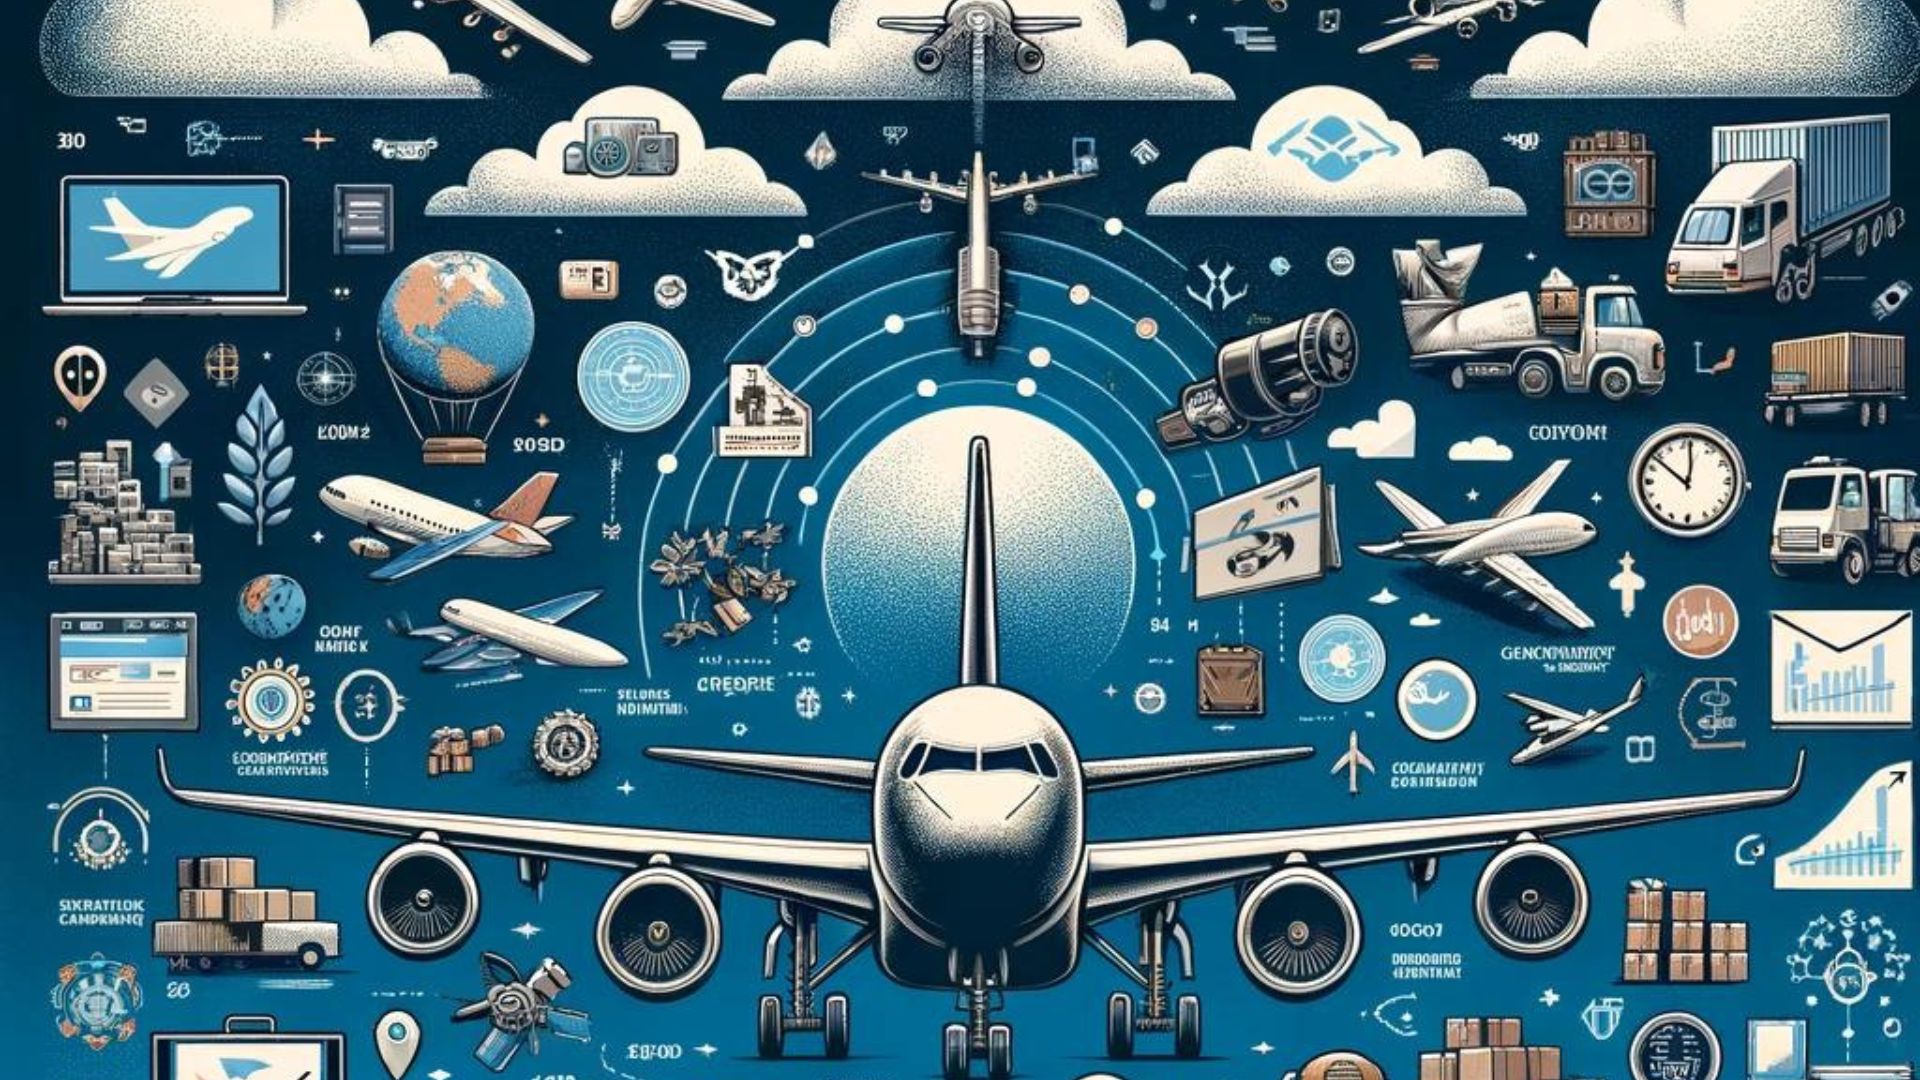 Illustration depicting aviation logistics. A large airplane dominates the center, surrounded by various related icons such as clouds, cargo, graphs, trucks, satellites, and global maps. This vibrant scene highlights the evolution of air cargo and its pivotal role in the interconnected world of transportation and logistics.